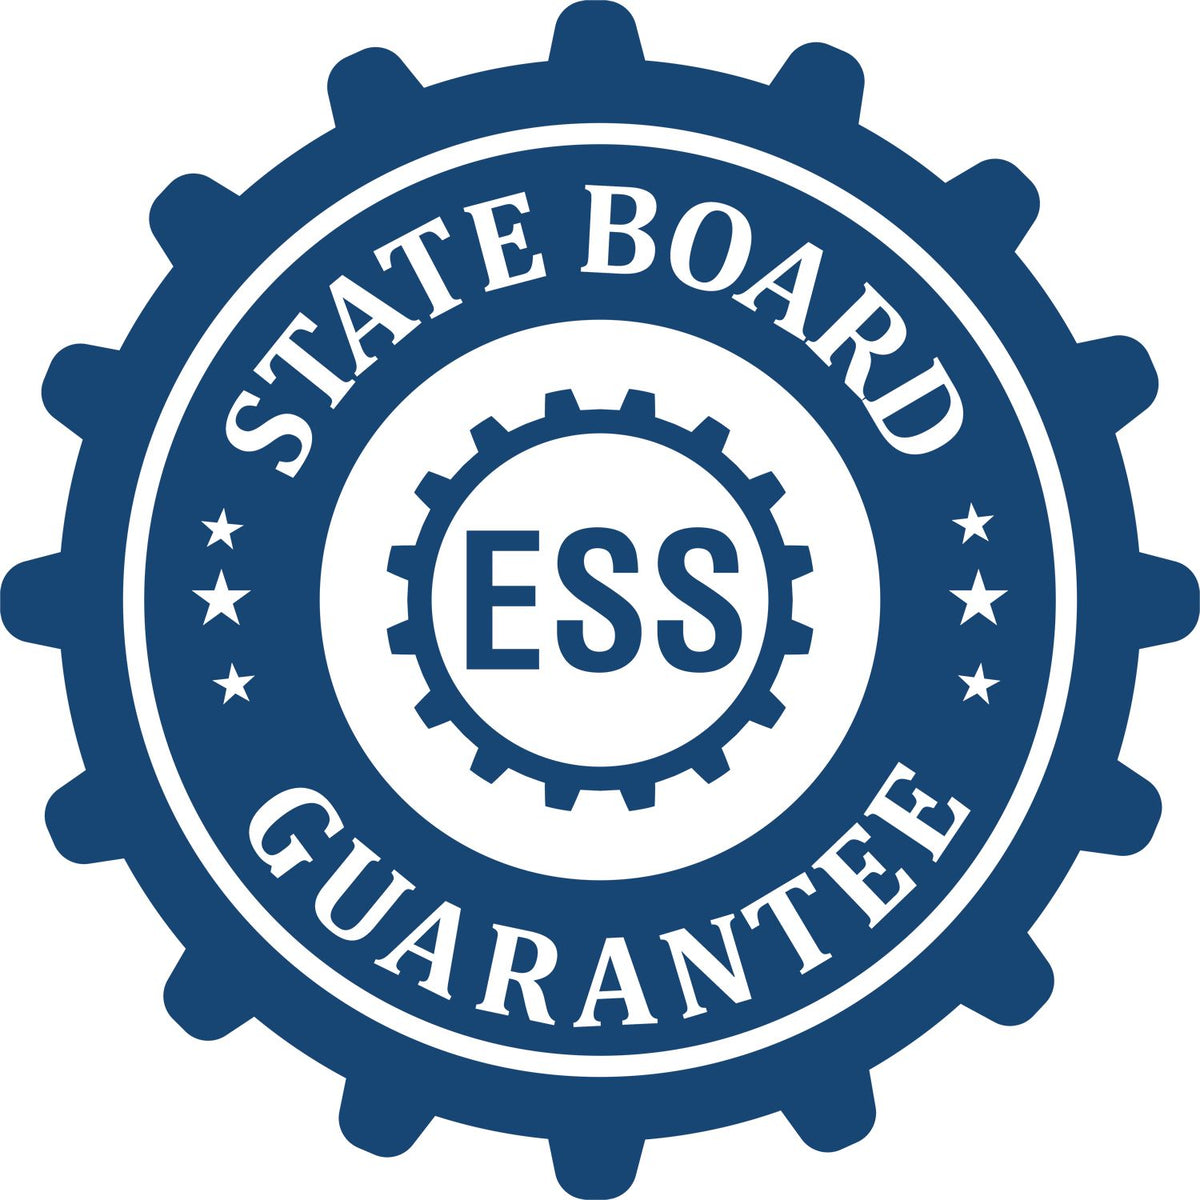 An emblem in a gear shape illustrating a state board guarantee for the Premium MaxLight Pre-Inked Utah Landscape Architectural Stamp product.